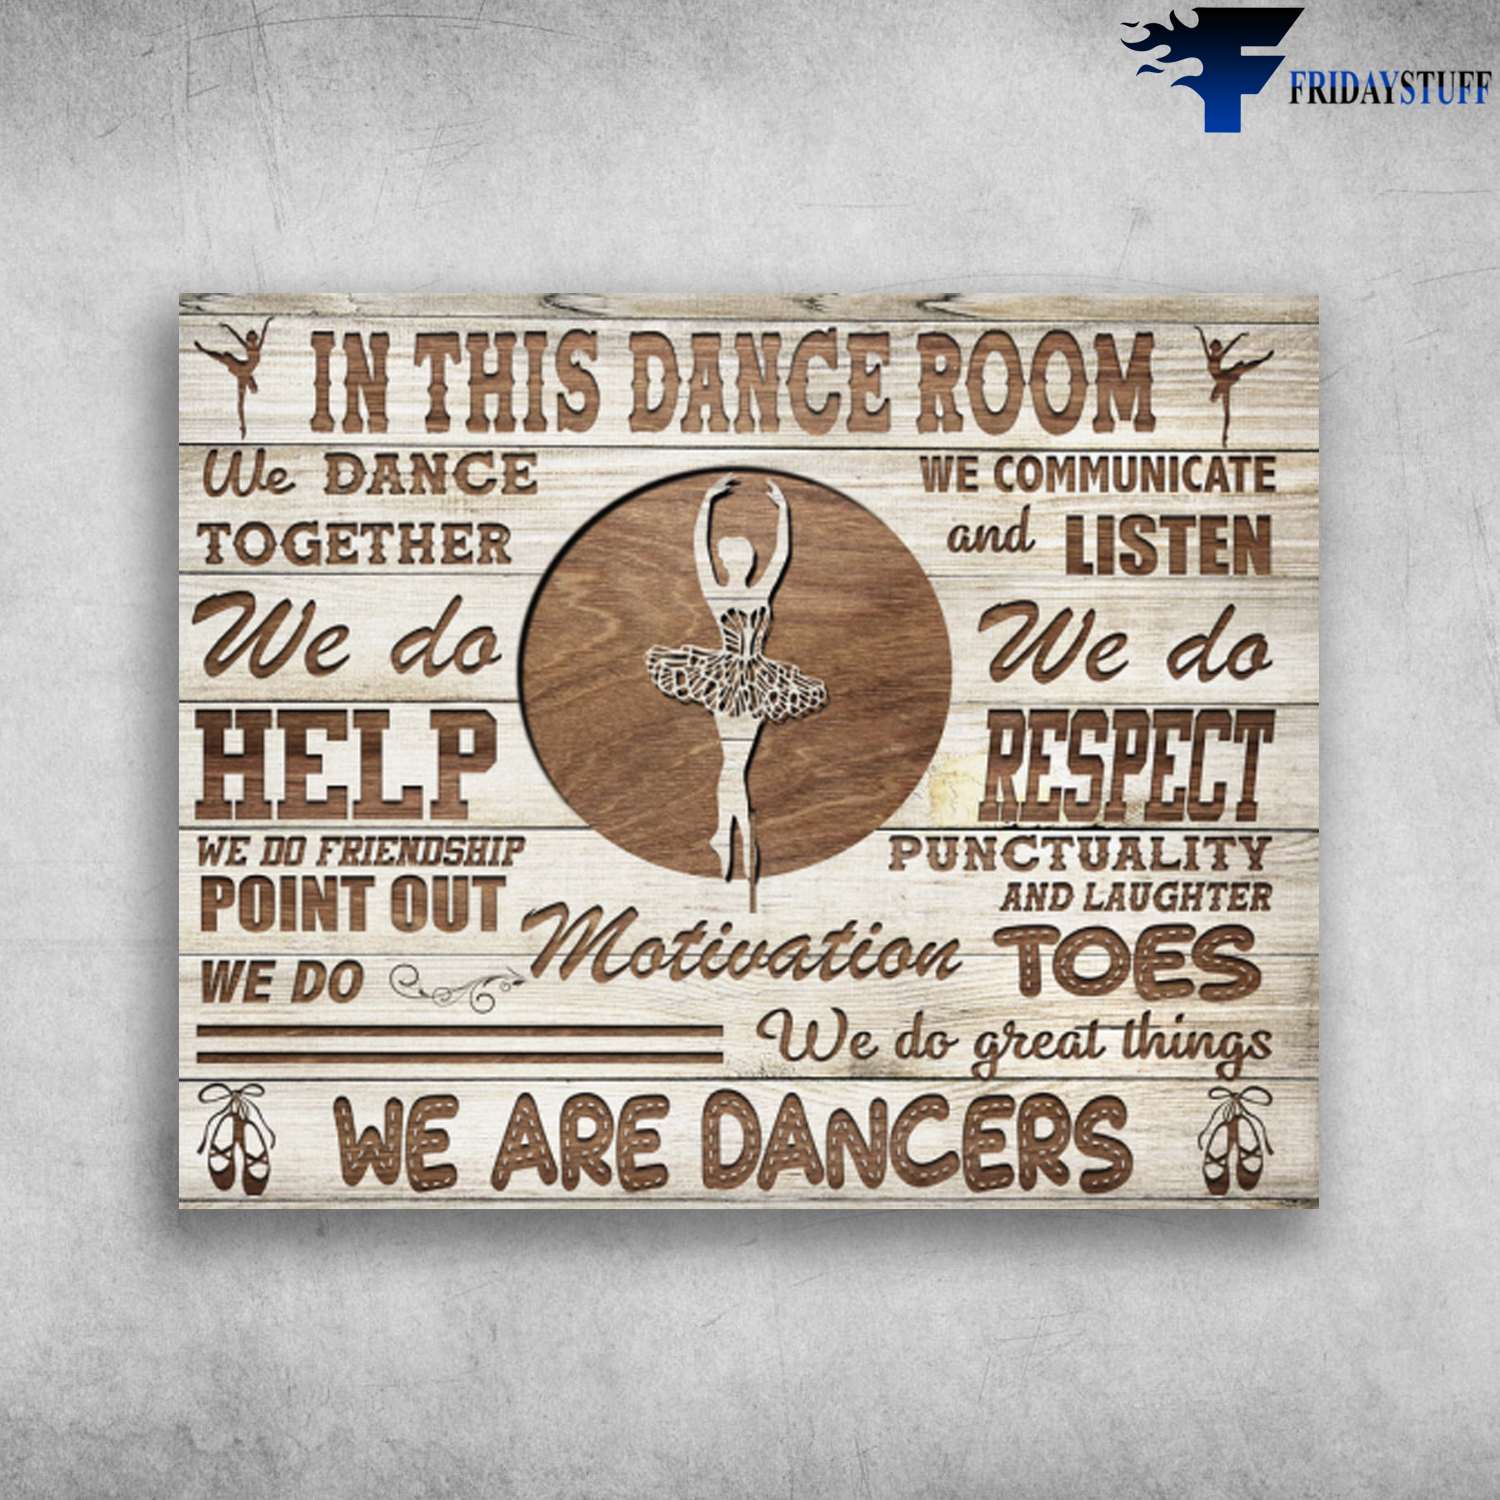 In This Dance Room We Are Dancers We Do Great Things We Do Help